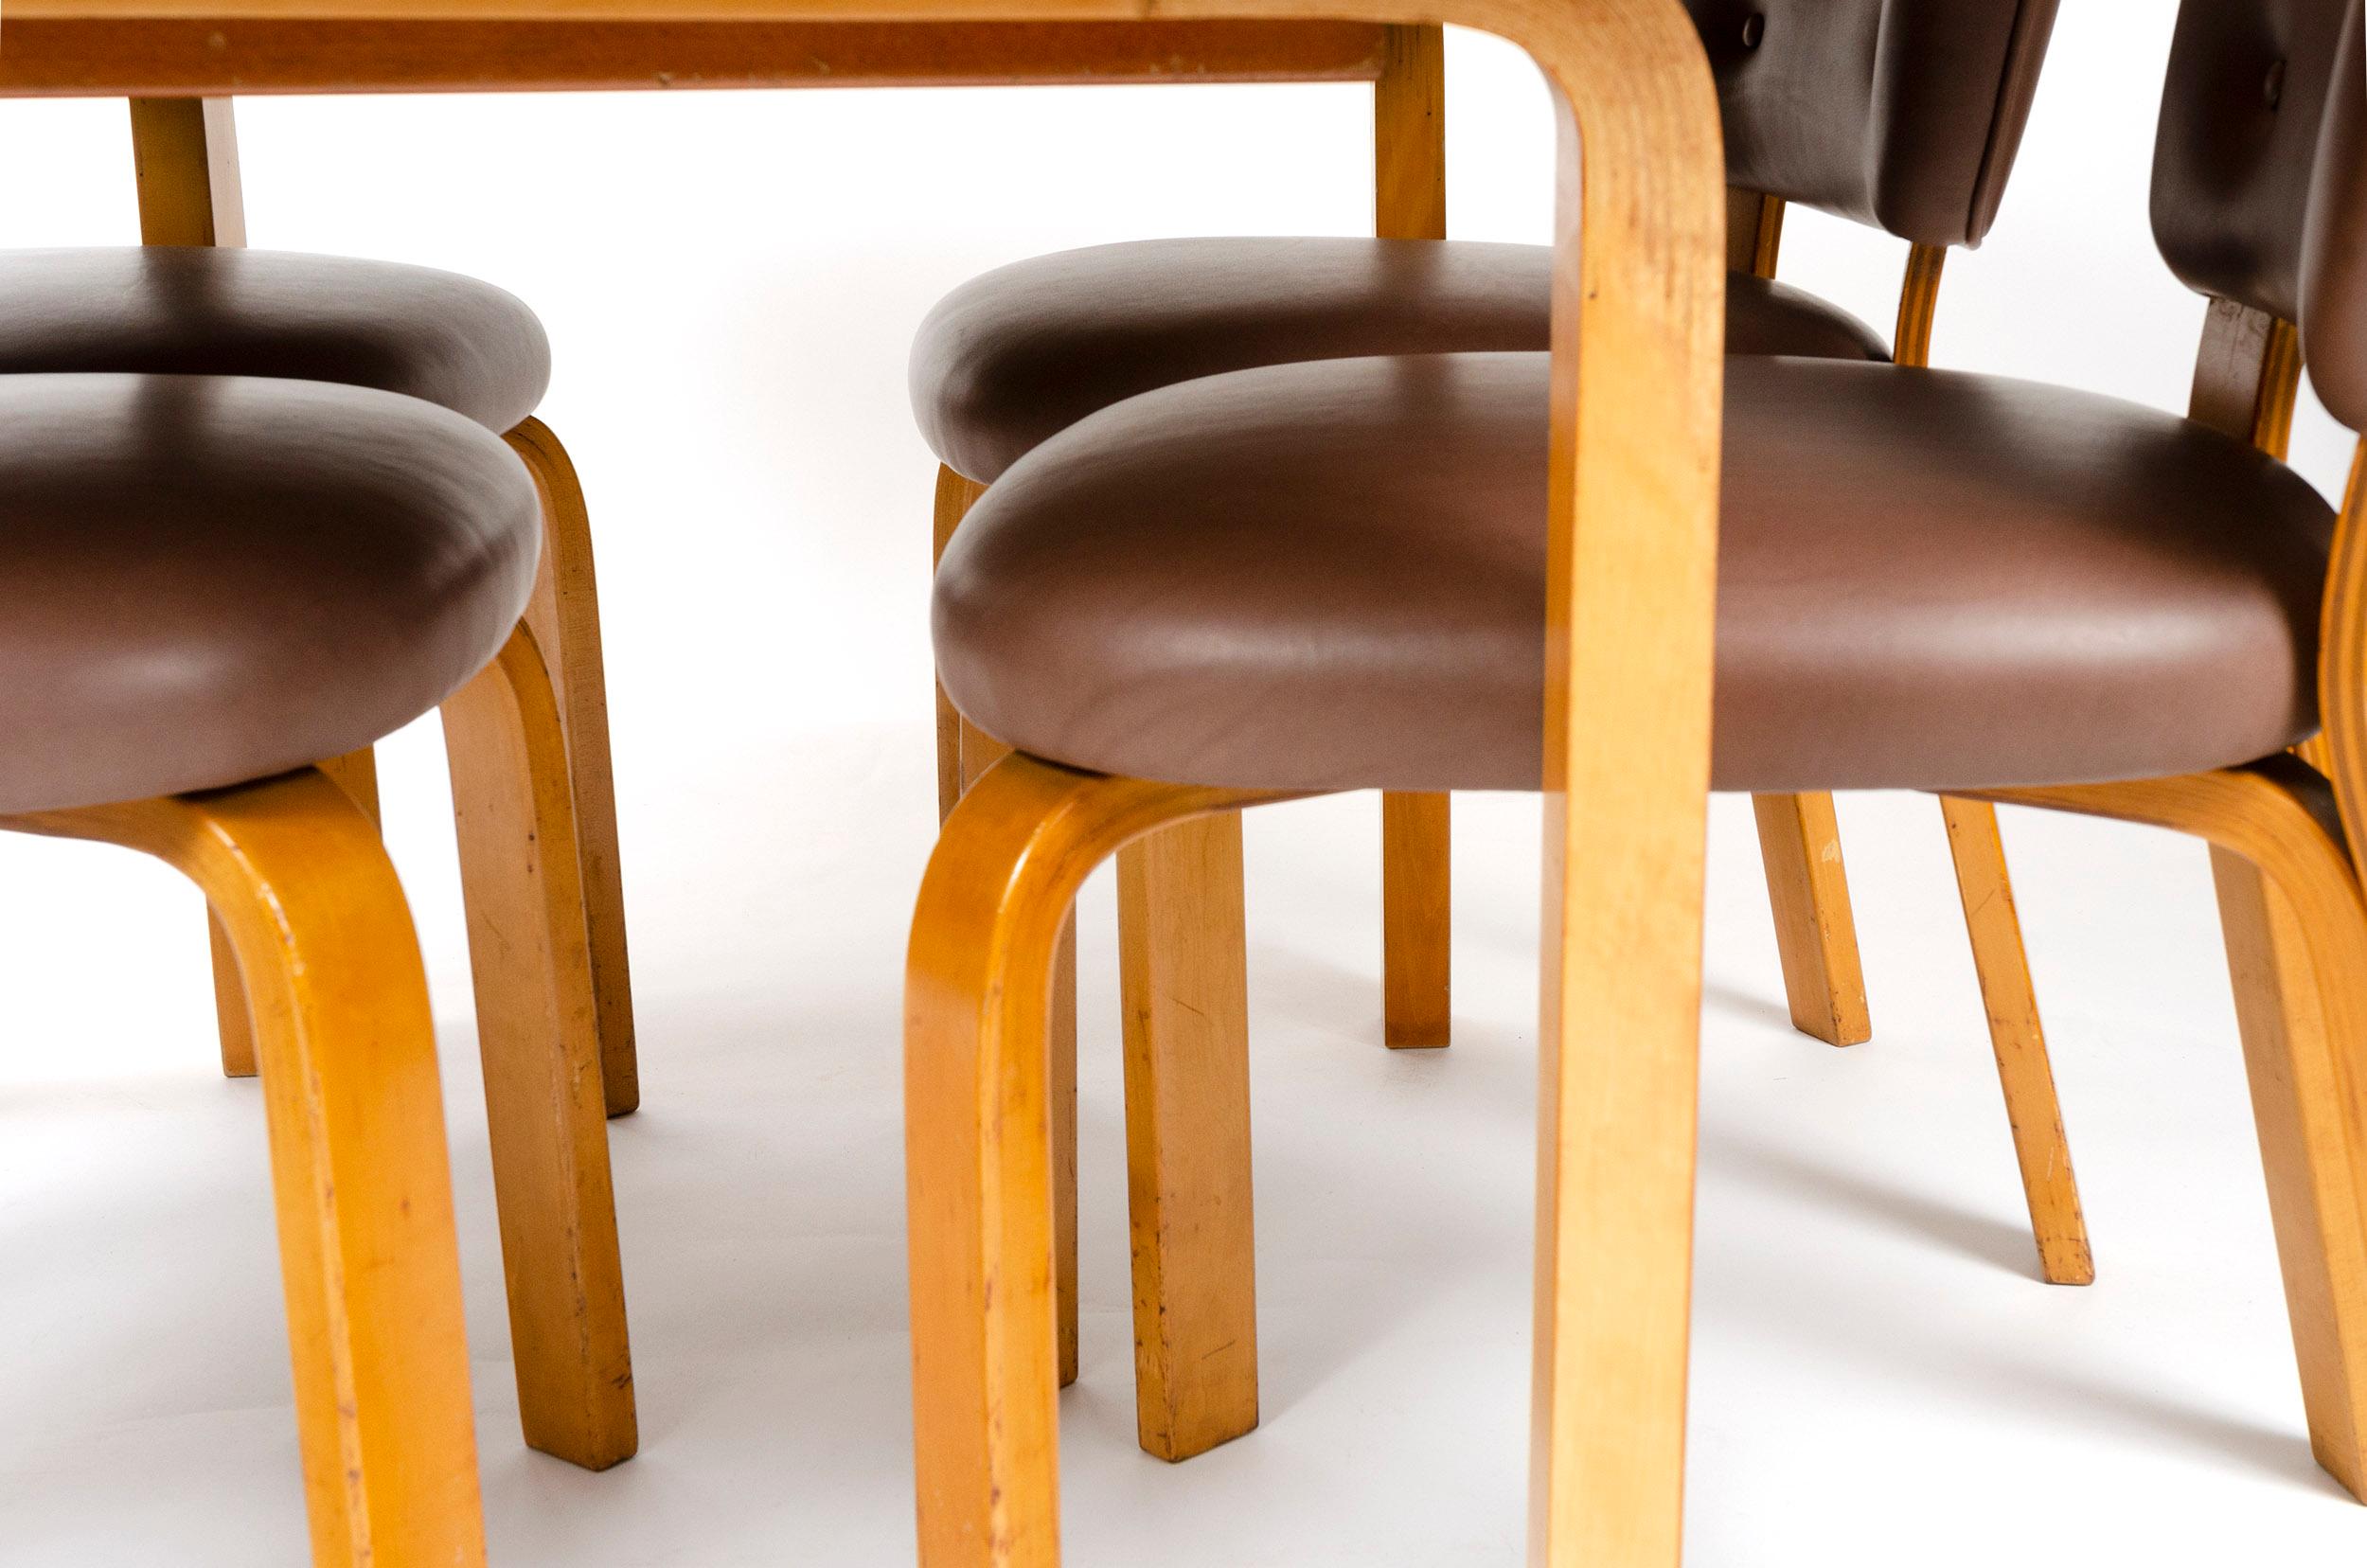 Mid-20th Century 1940s Finnish Set of Four Upholstered Dining Chairs by Alvar Aalto for Artek For Sale